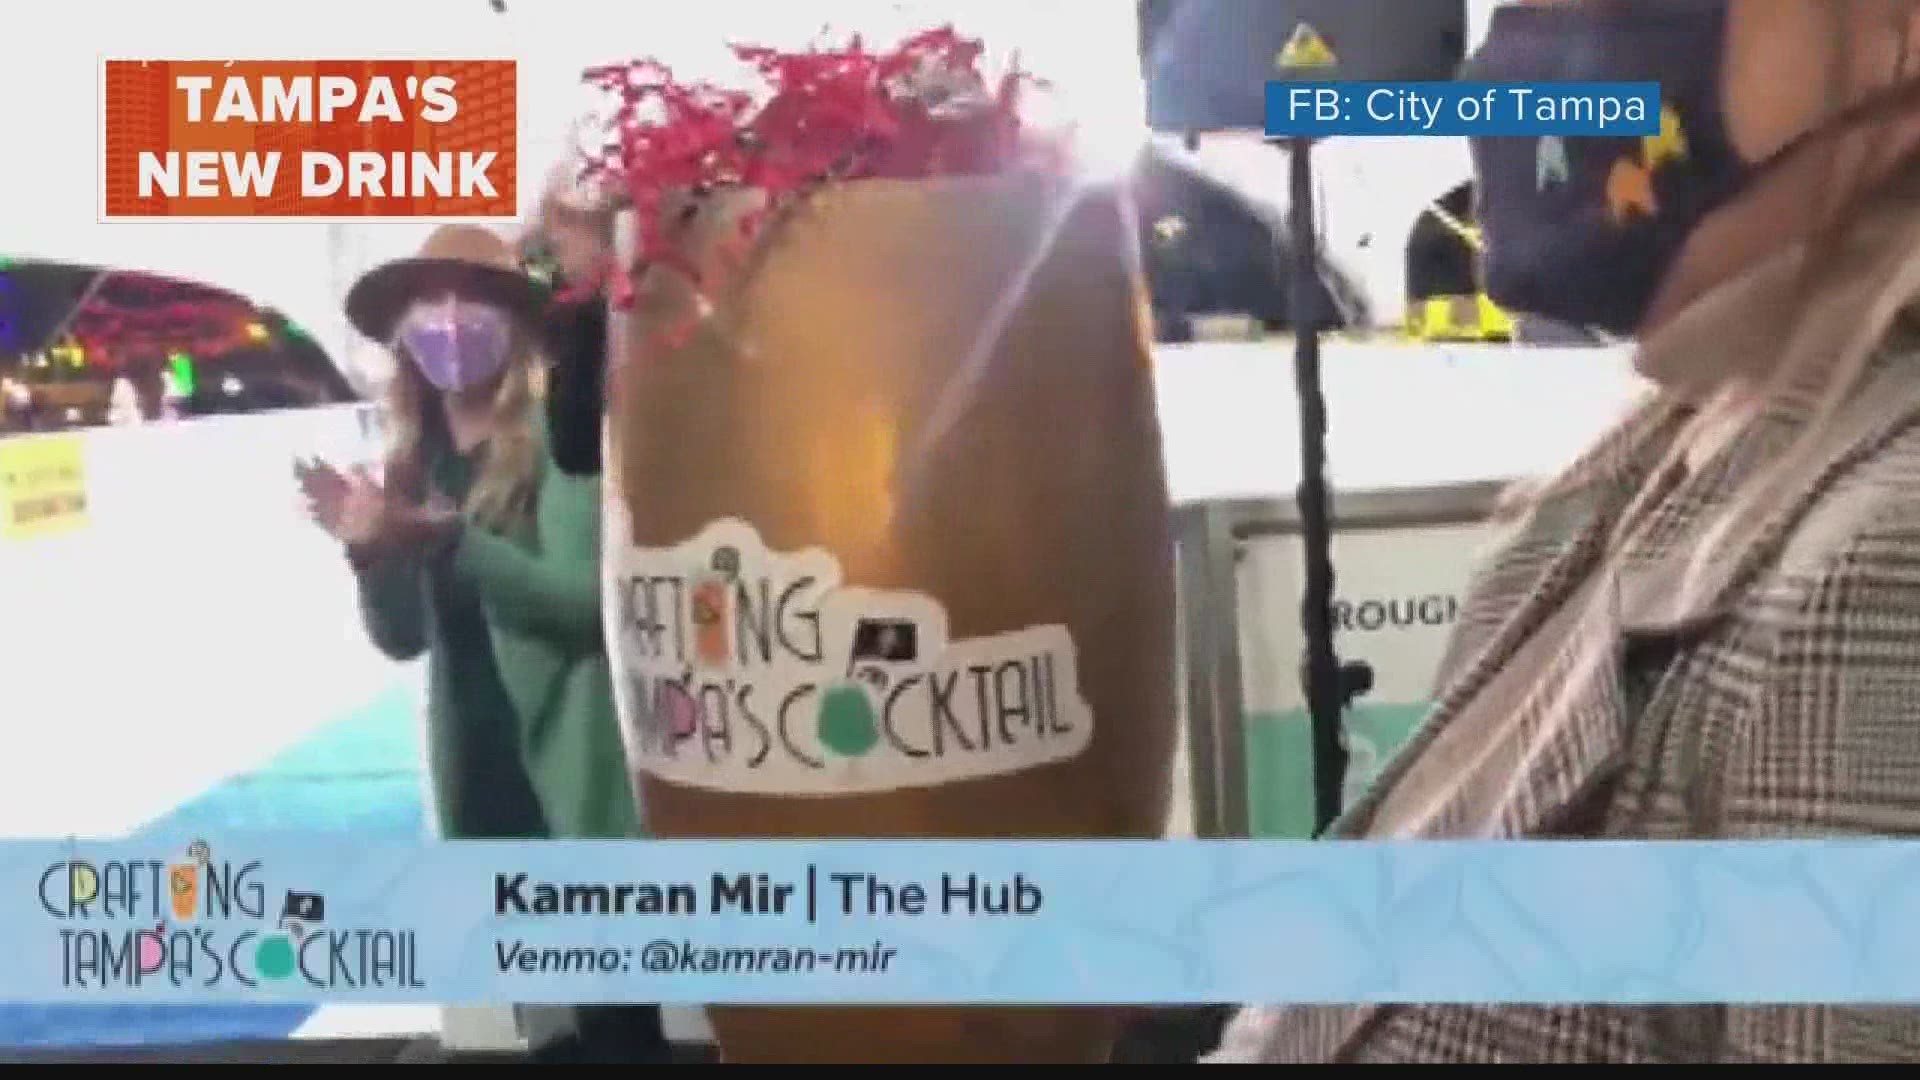 The winning cocktail is 6AM on 7th Avenue, crafted by mixologist Kamran Mir from The Hub.